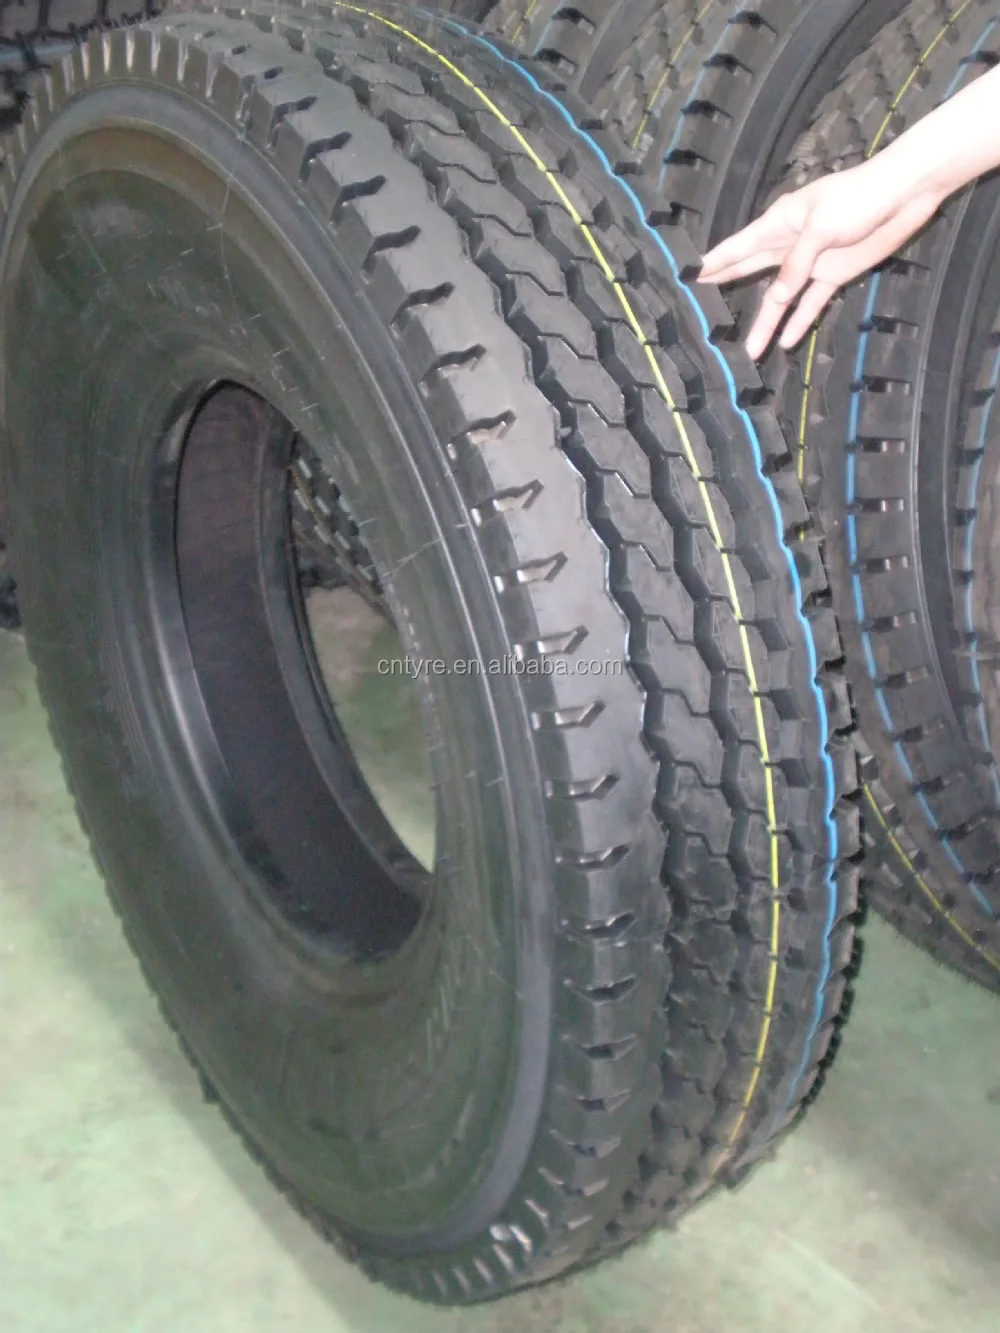 Radial Tyres Wholesale China Semi Trailer Truck Tires Tyre 295/75r22.5 Are 11r22.5 Tires The Same As 295/75r22.5